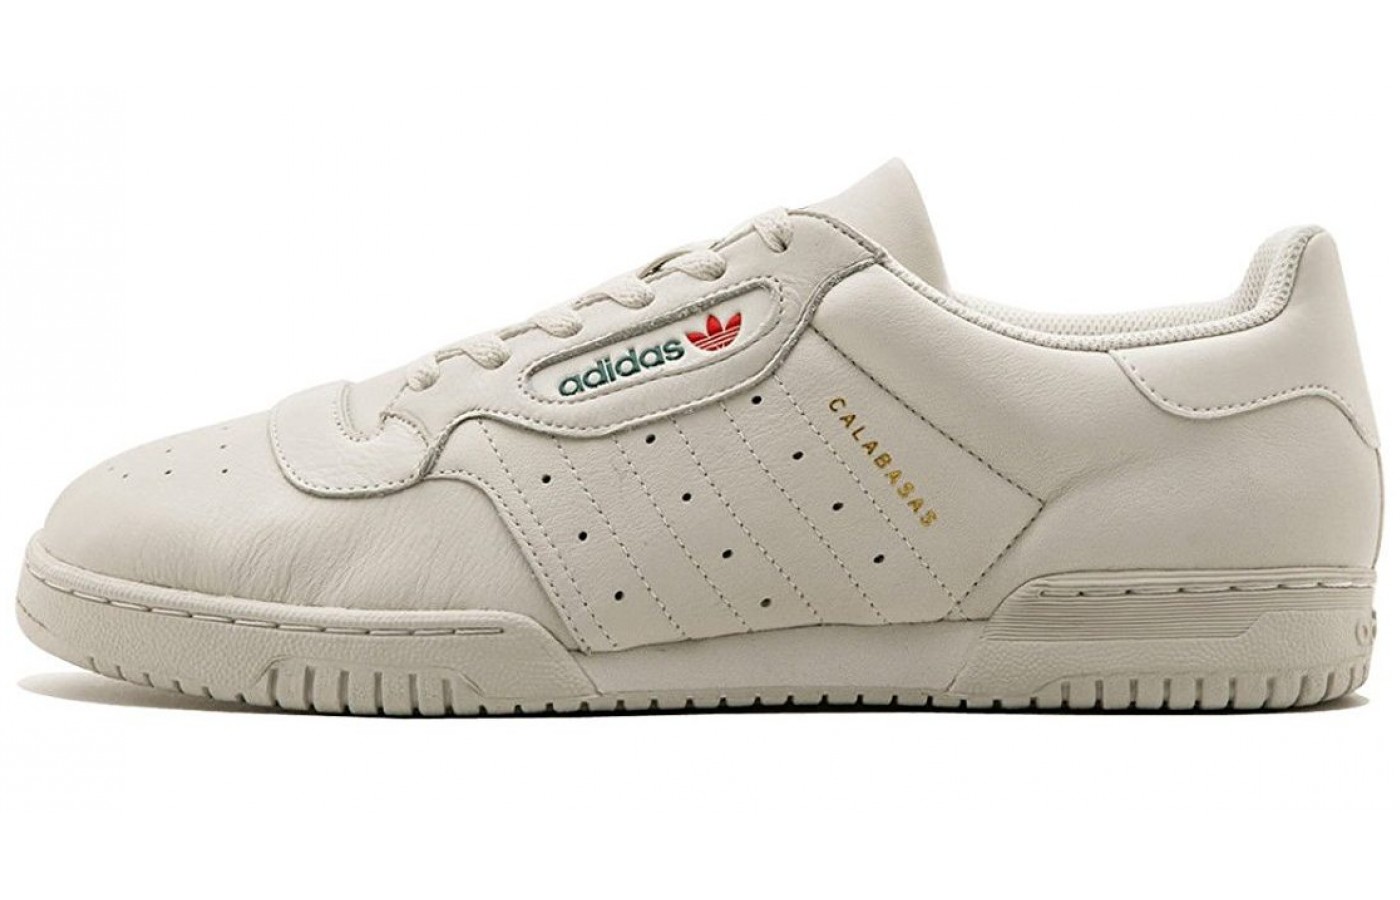 side view of the Adidas Yeezy Powerphase